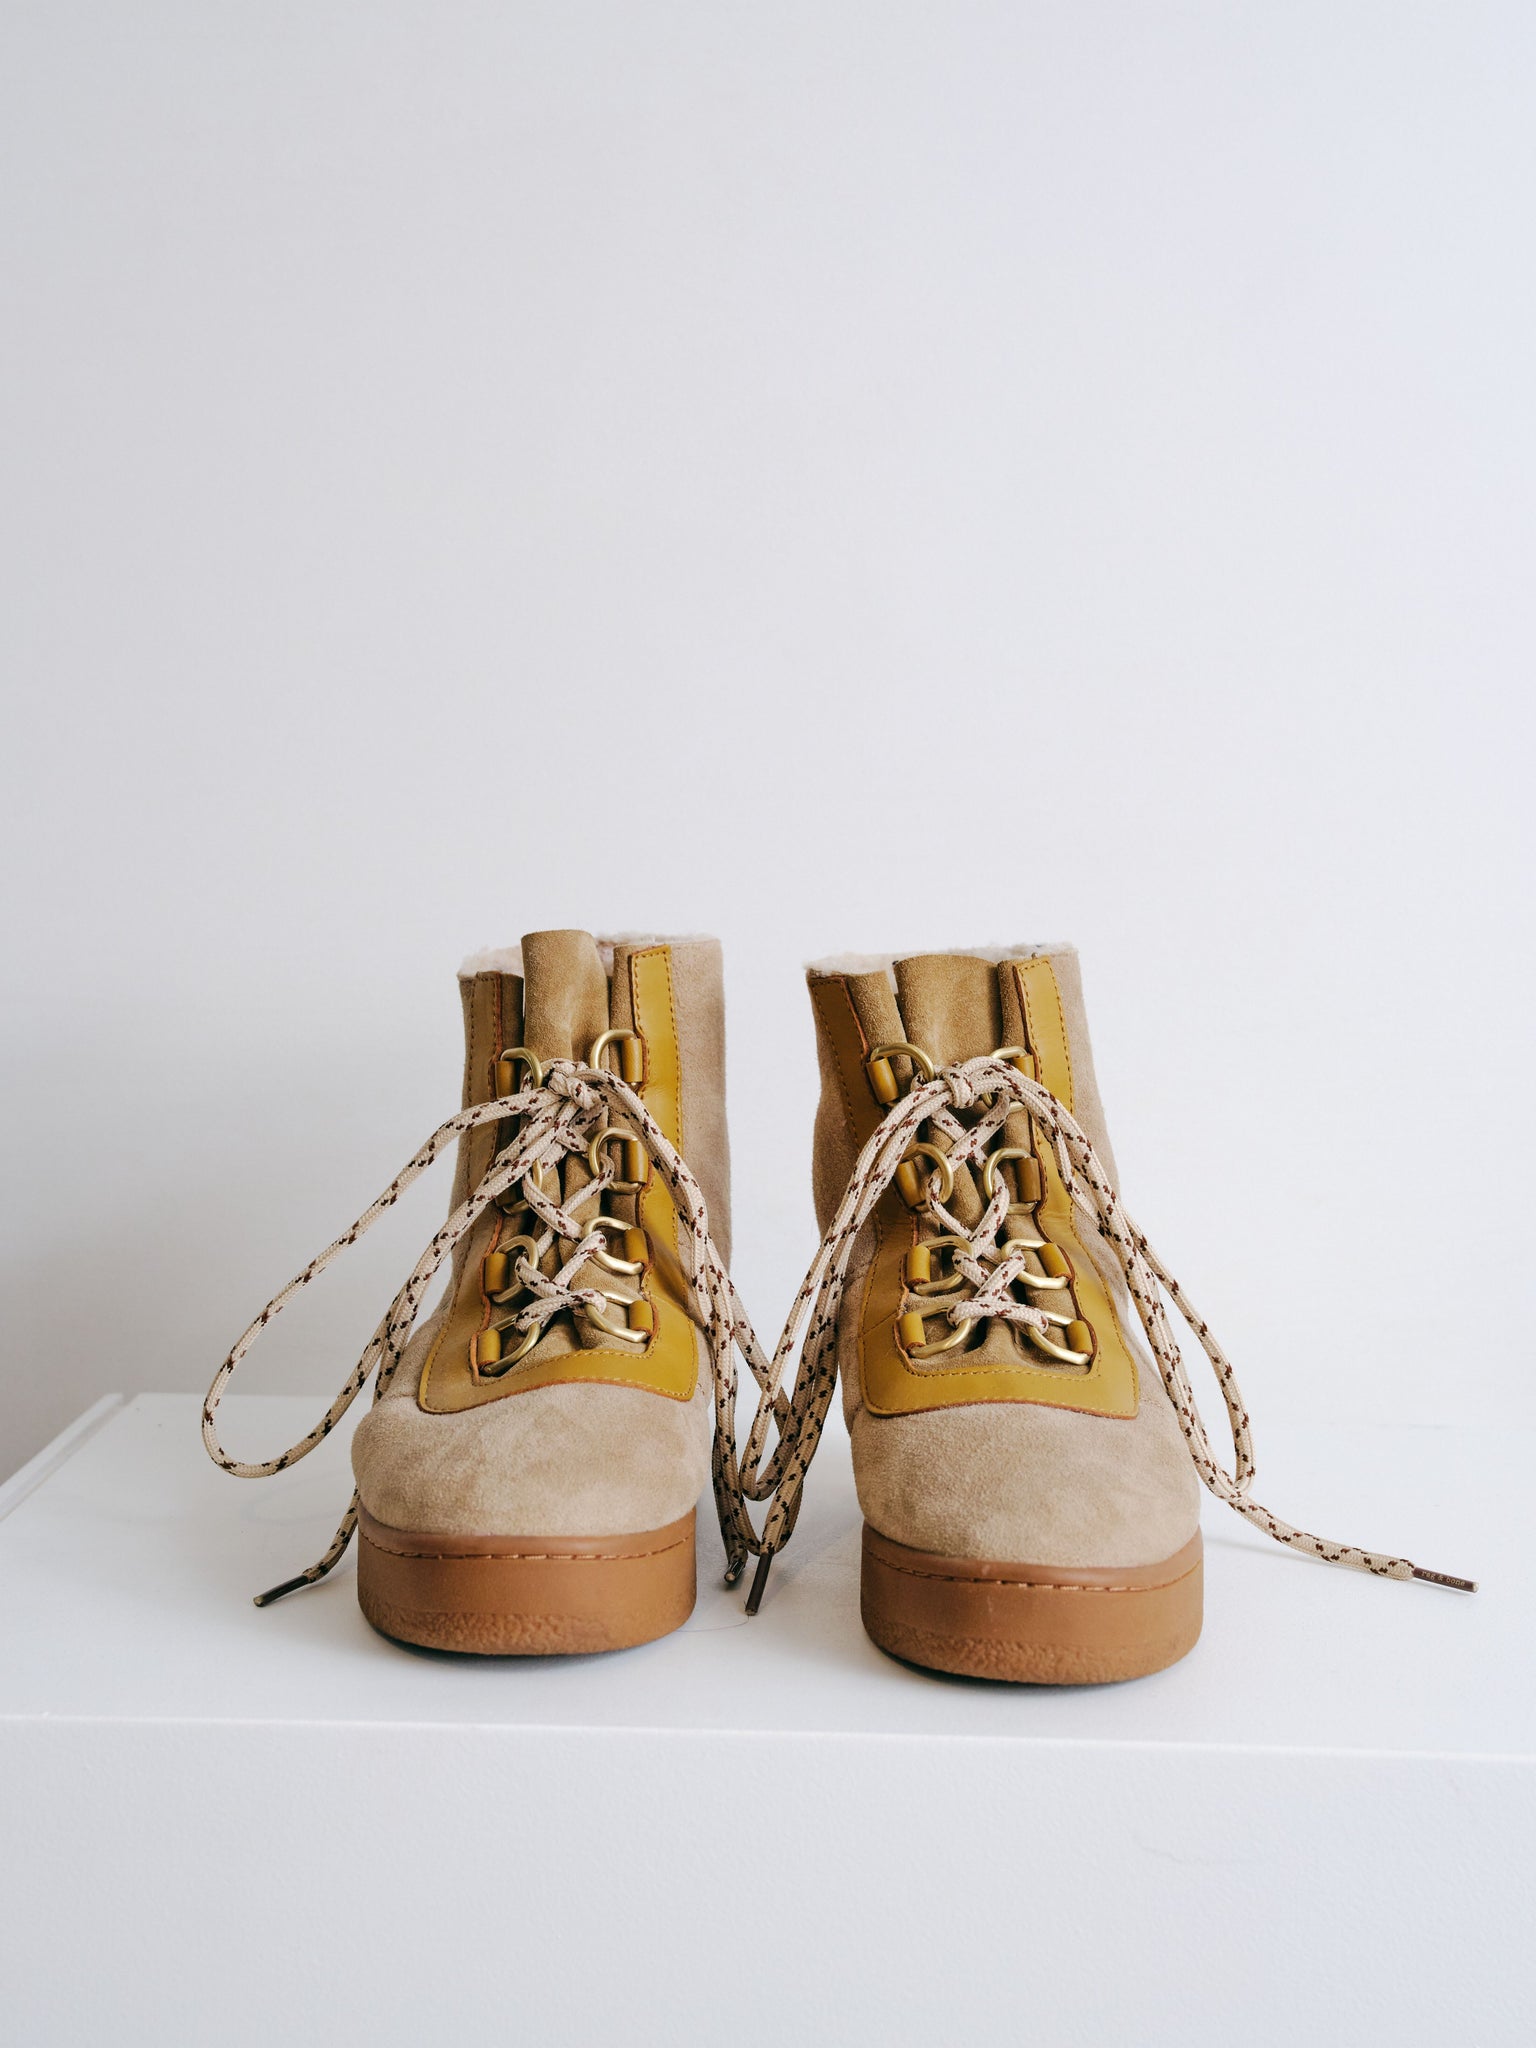 Rag & Bone Taupe/Camel Lamb/Cow Leather Boots